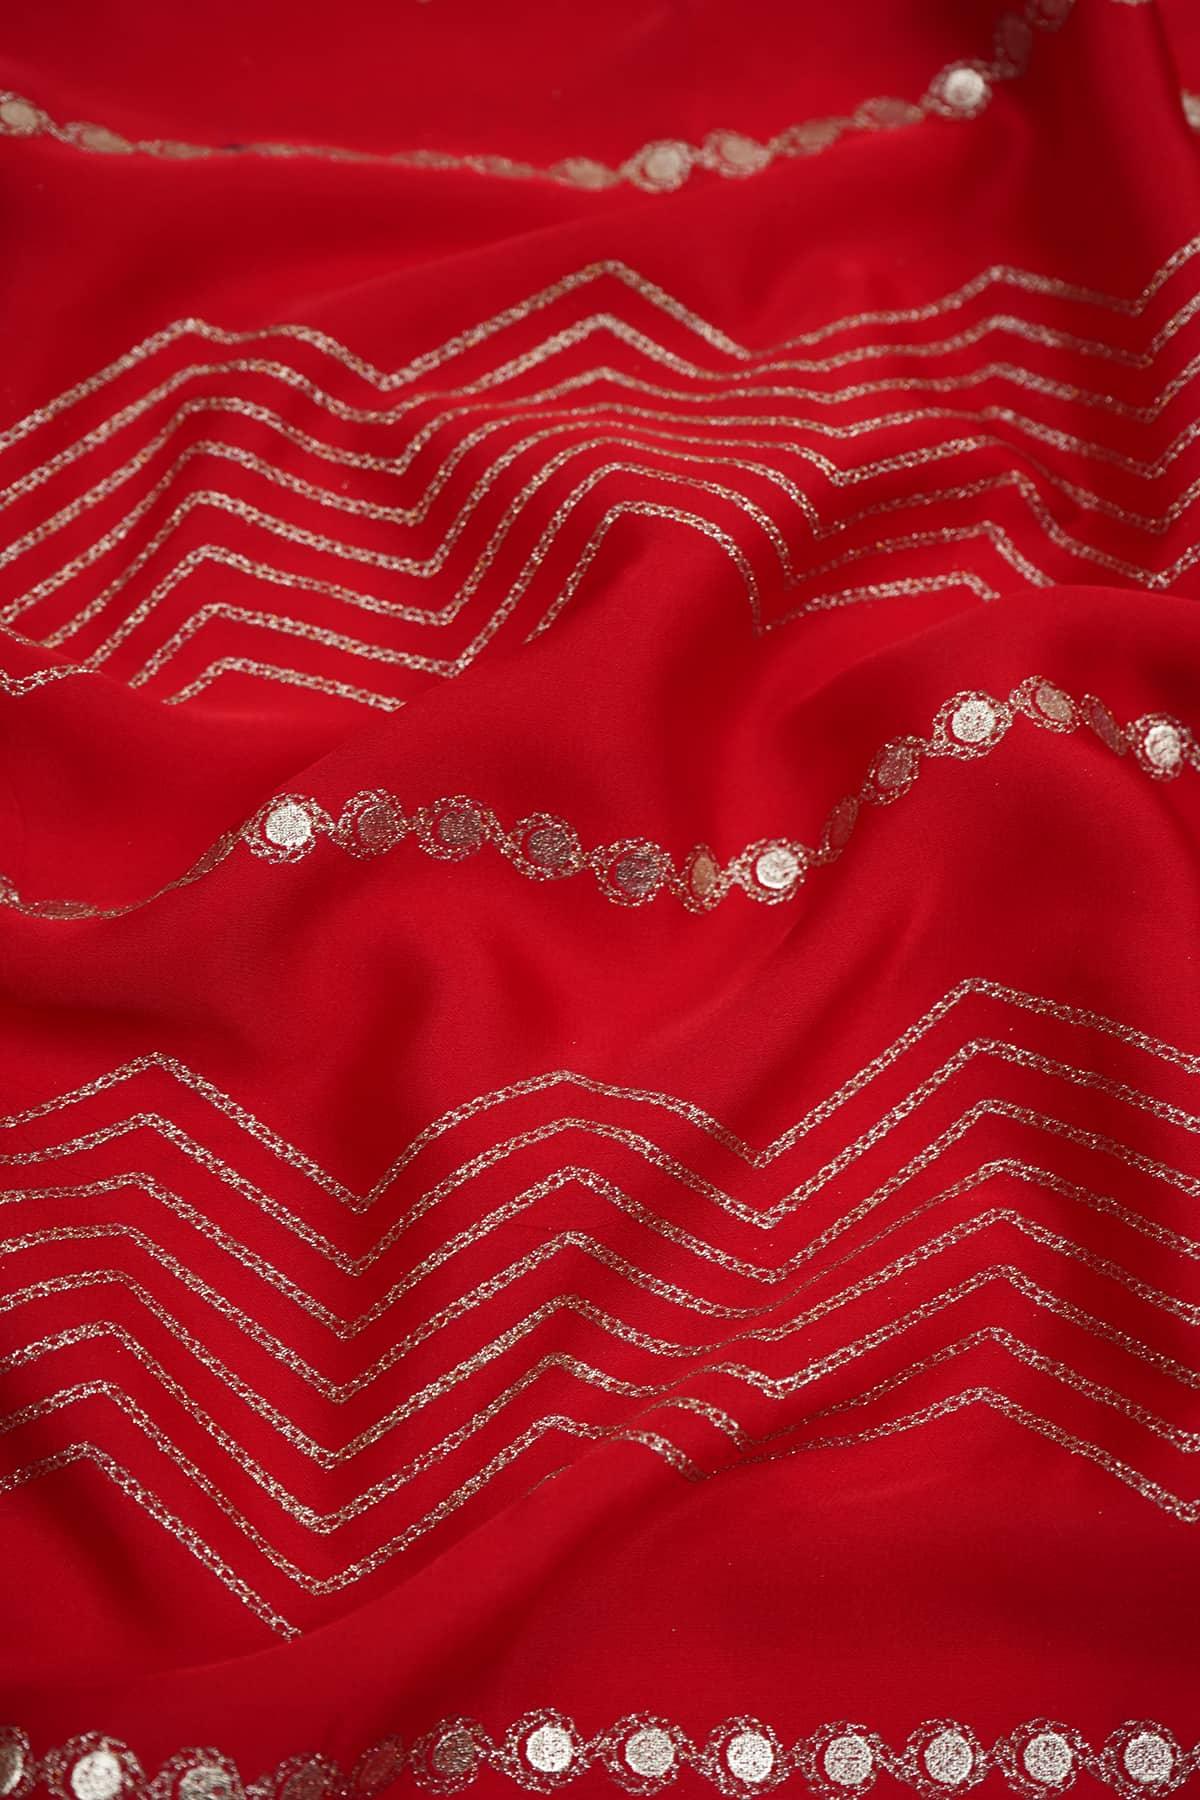 Stripes of Pin-Tucked Geometric Zig Zag Pattern on Red Charmie Satin - saraaha.com - accesories, blouses, Charmie Satin, dresses and more, Festive, gowns, indo western, kurtas, sarees, Satin, Screen Print- Foil Work, skirts, Suits, tops, trimmings